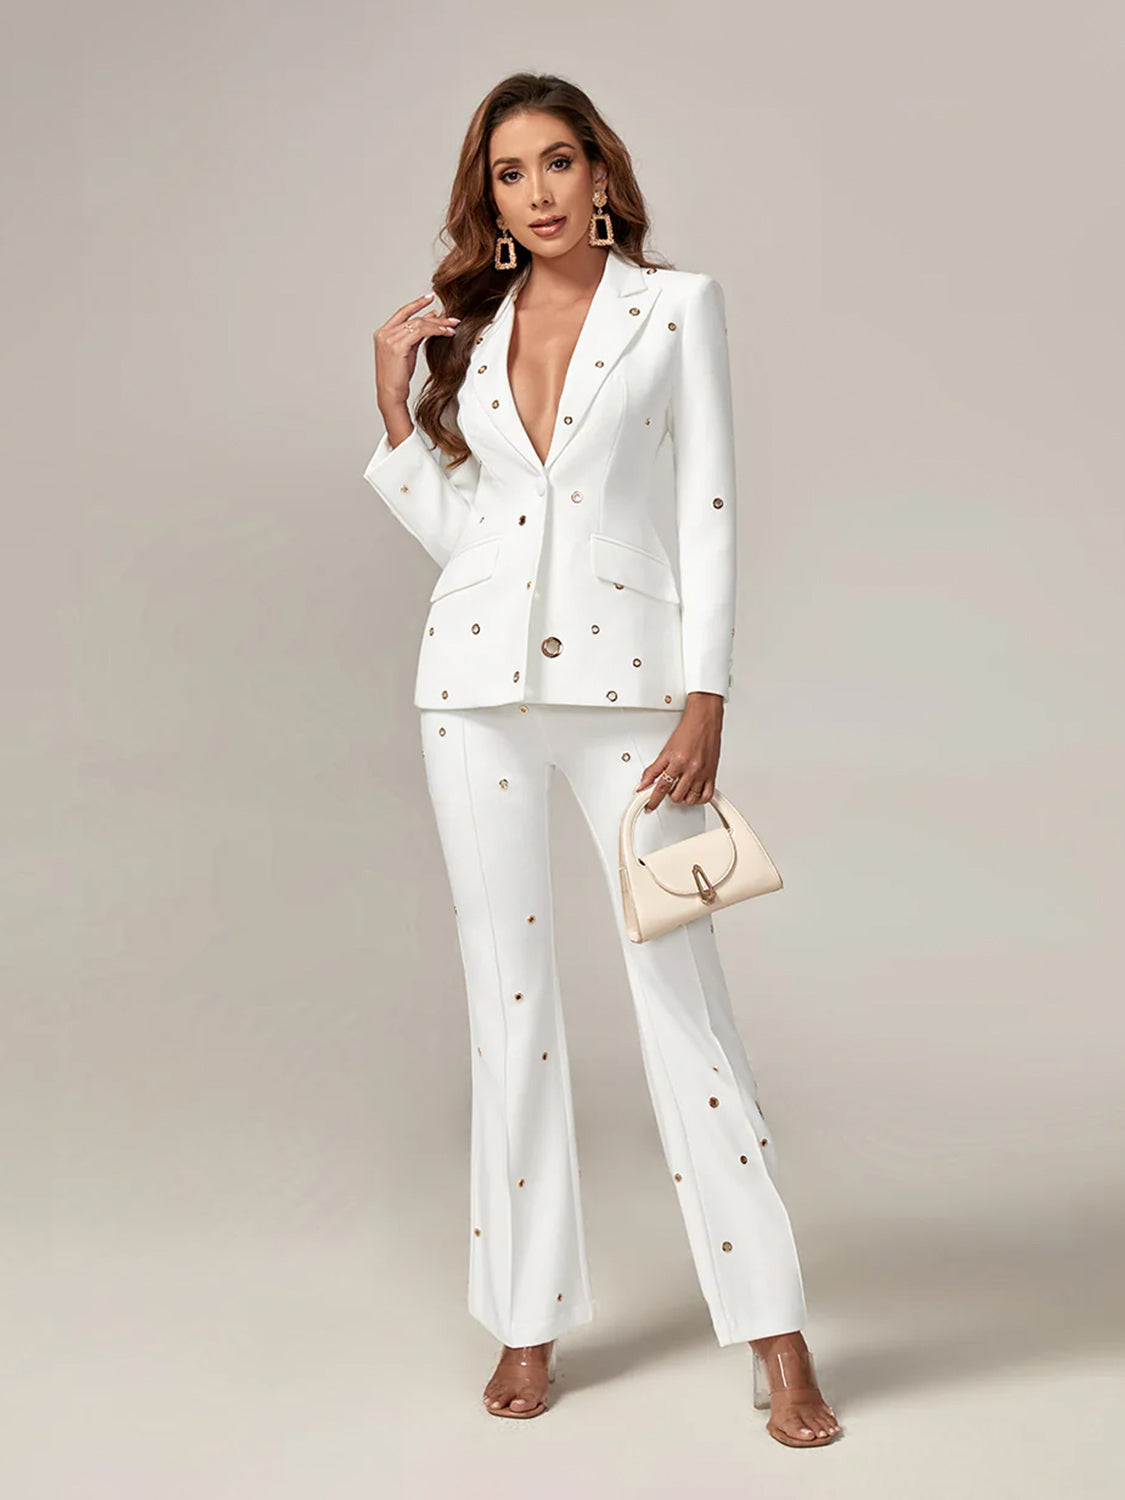 CLEVIE JACKET + PANTS SET IN WHITE